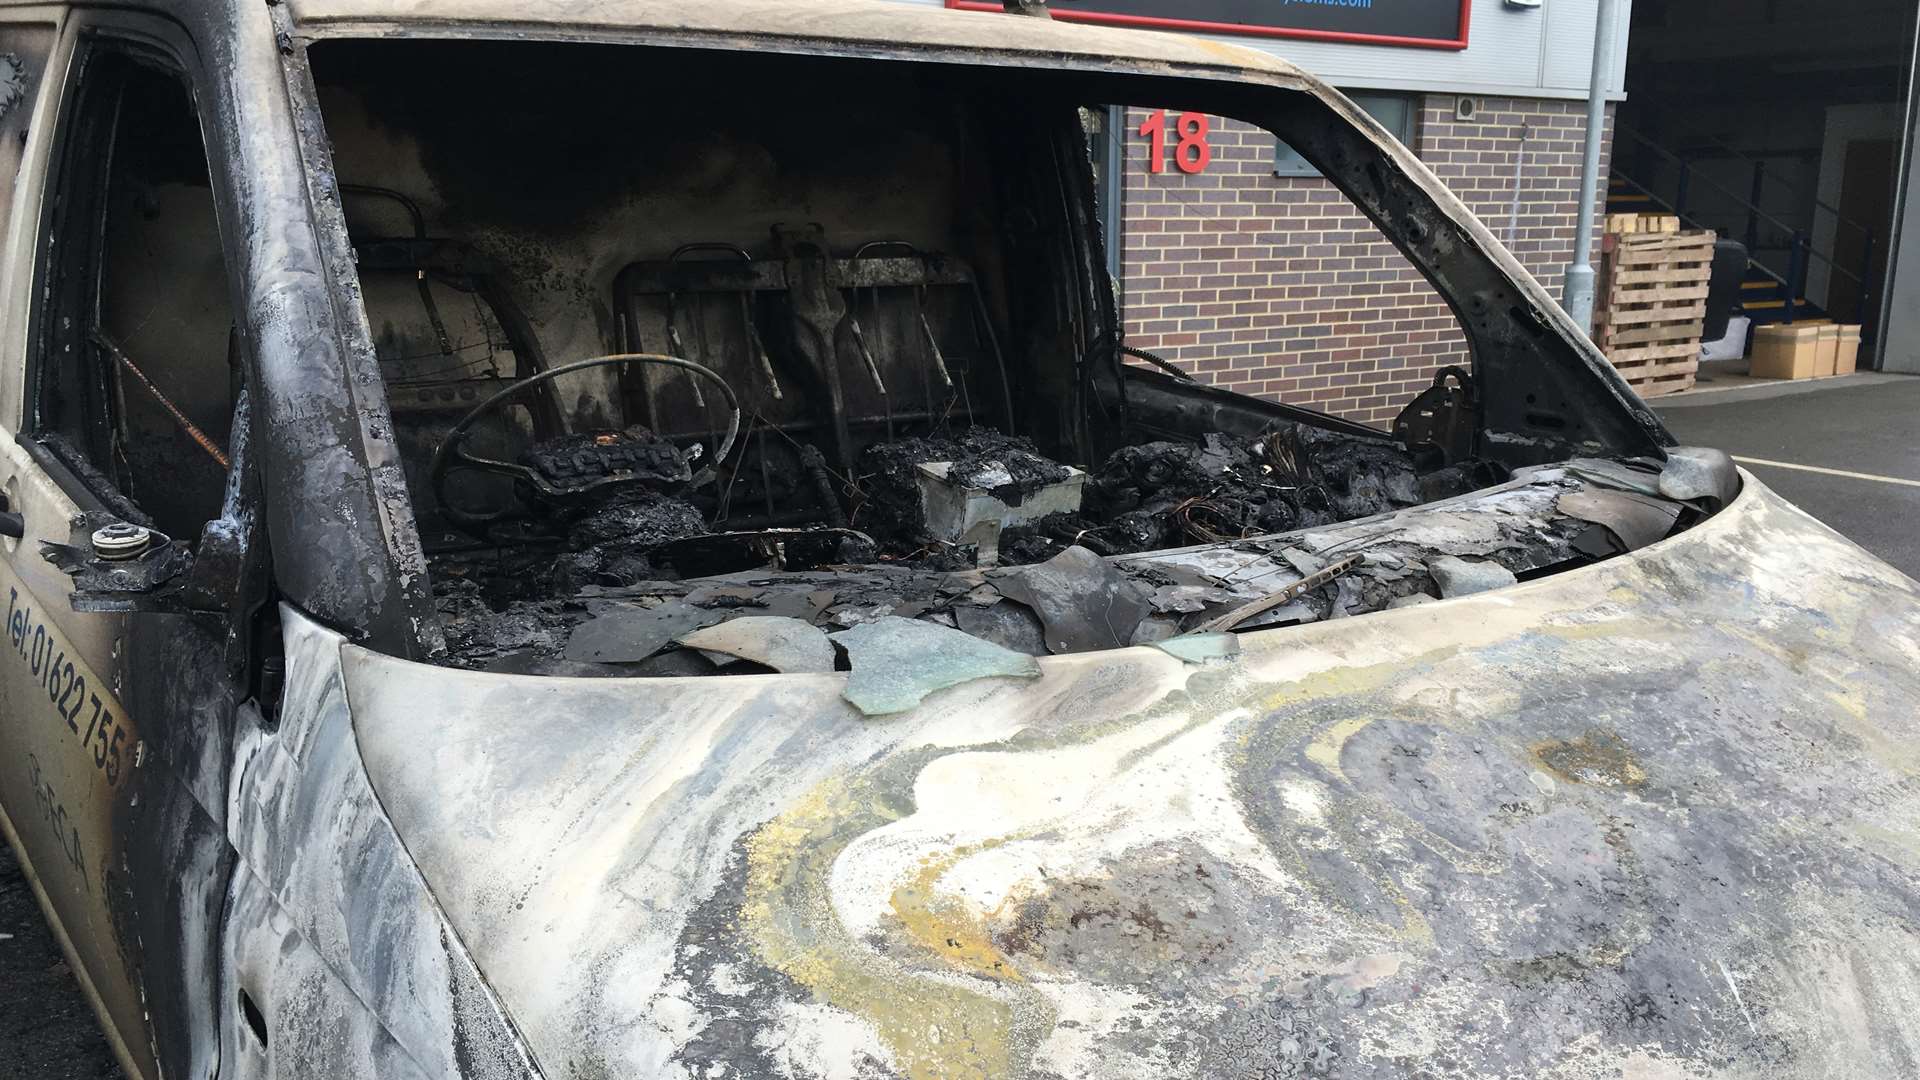 A van parked outside Enhanced Controlled Services is badly damaged after the fire